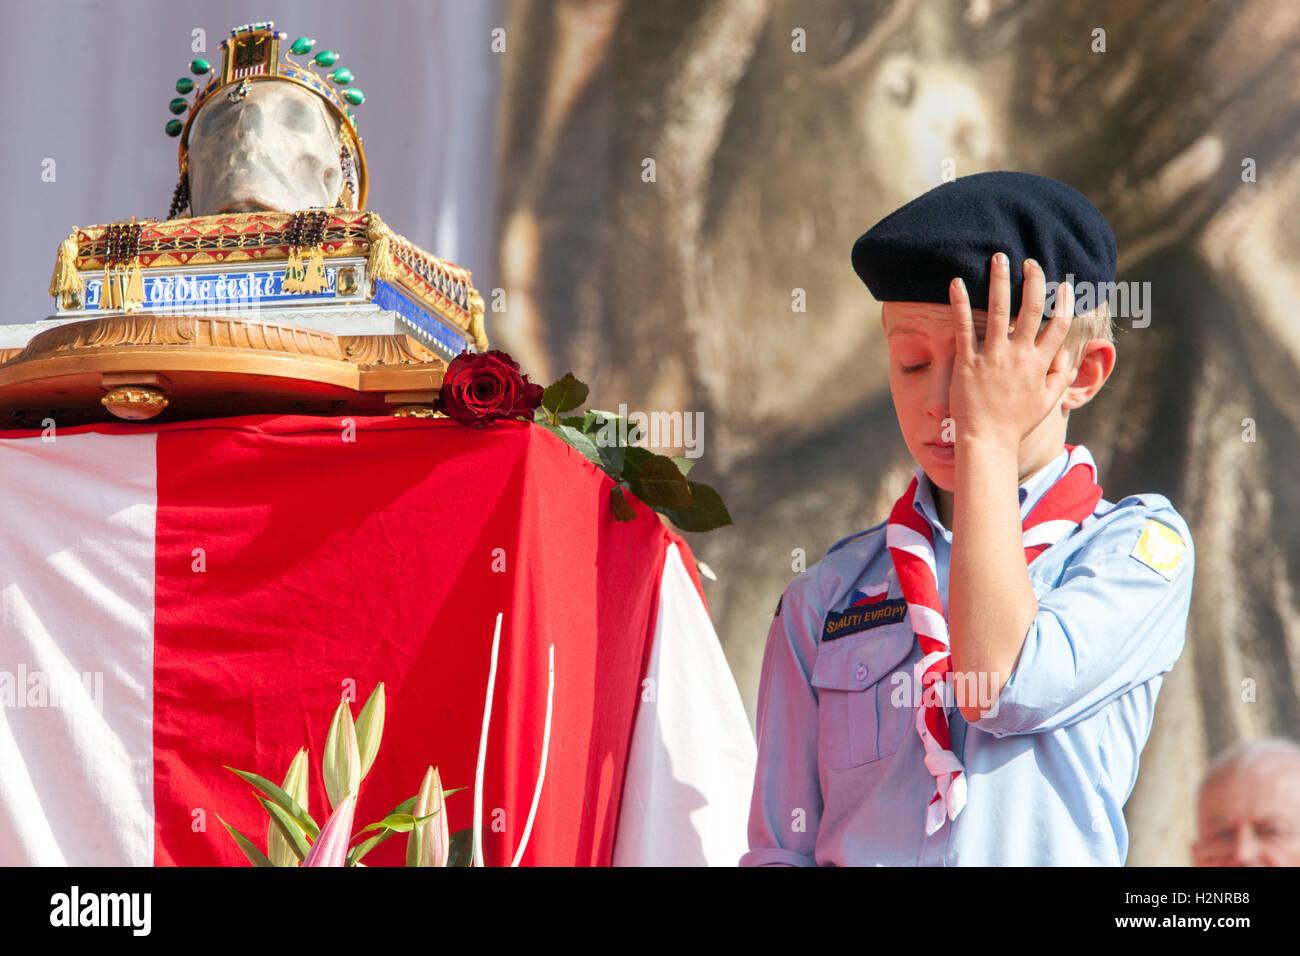 Scout's honor guard at the relics of St. Wenceslaus in Stara Boleslav, Czech Republic Stock Photo